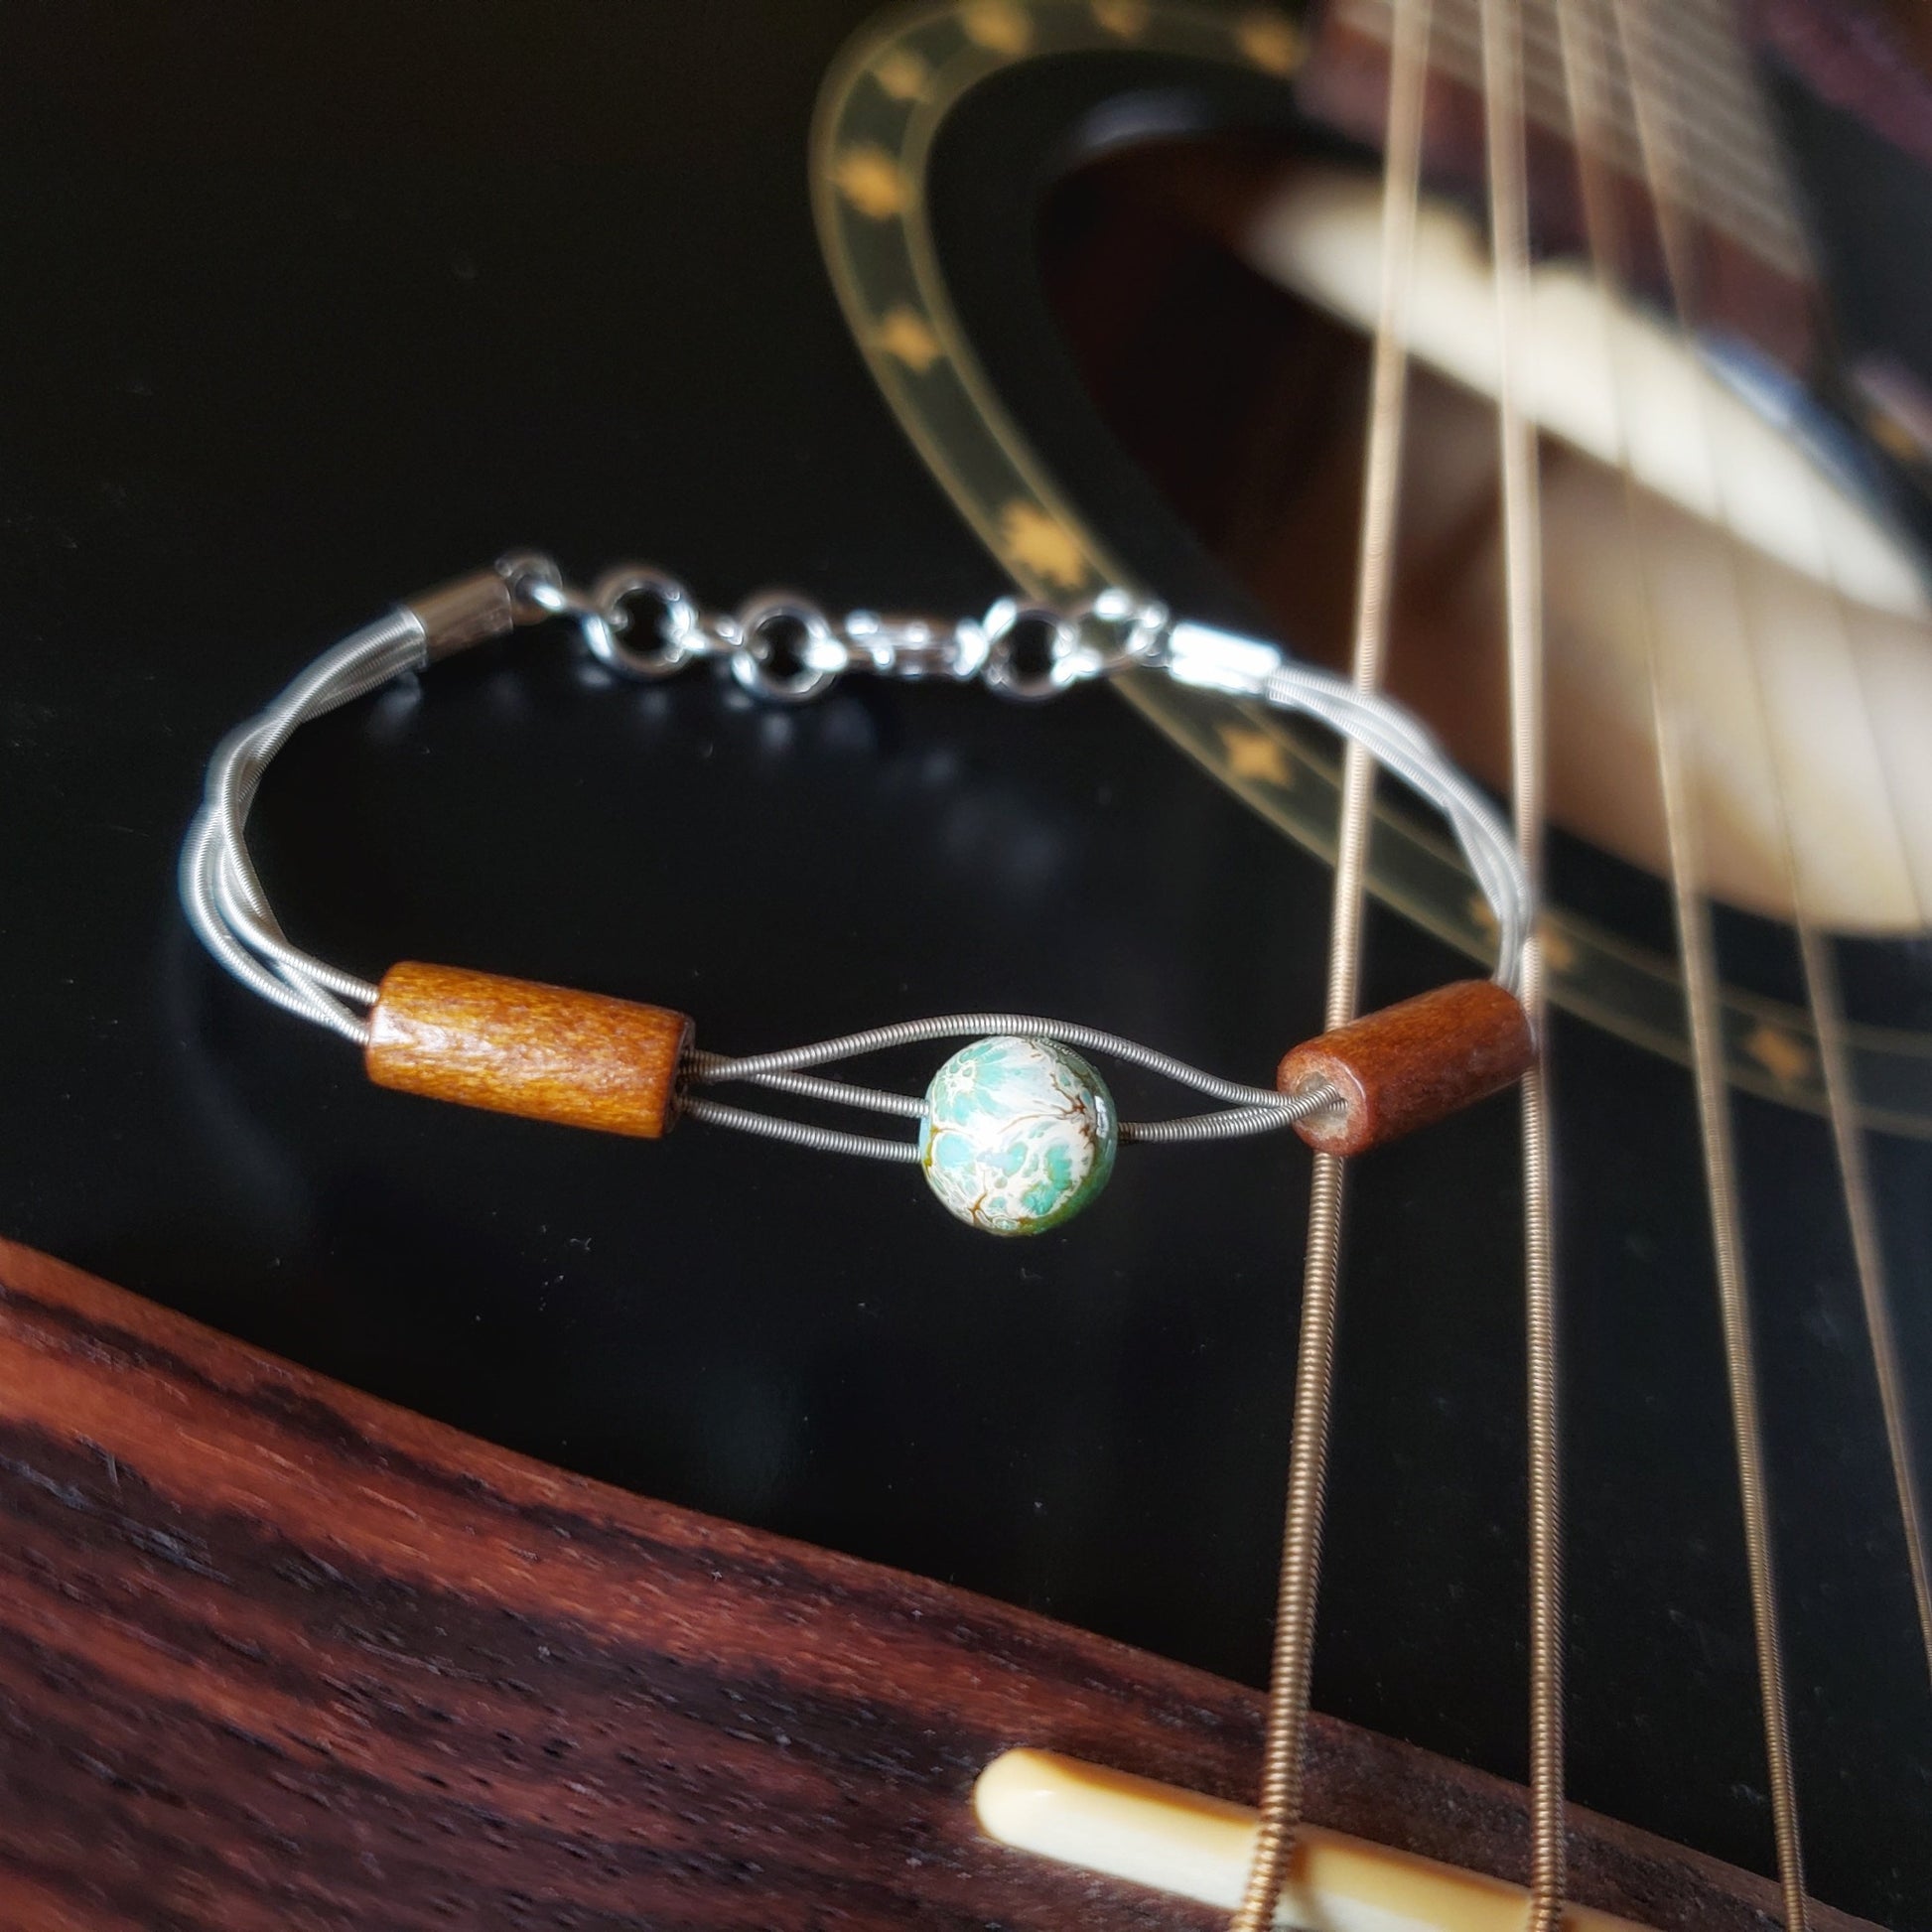 clasp style bracelet made from an upcycled guitar string on which there are two wood bead on either side of a green and gray round bead - the bracelet is resting on the string of a black guitar